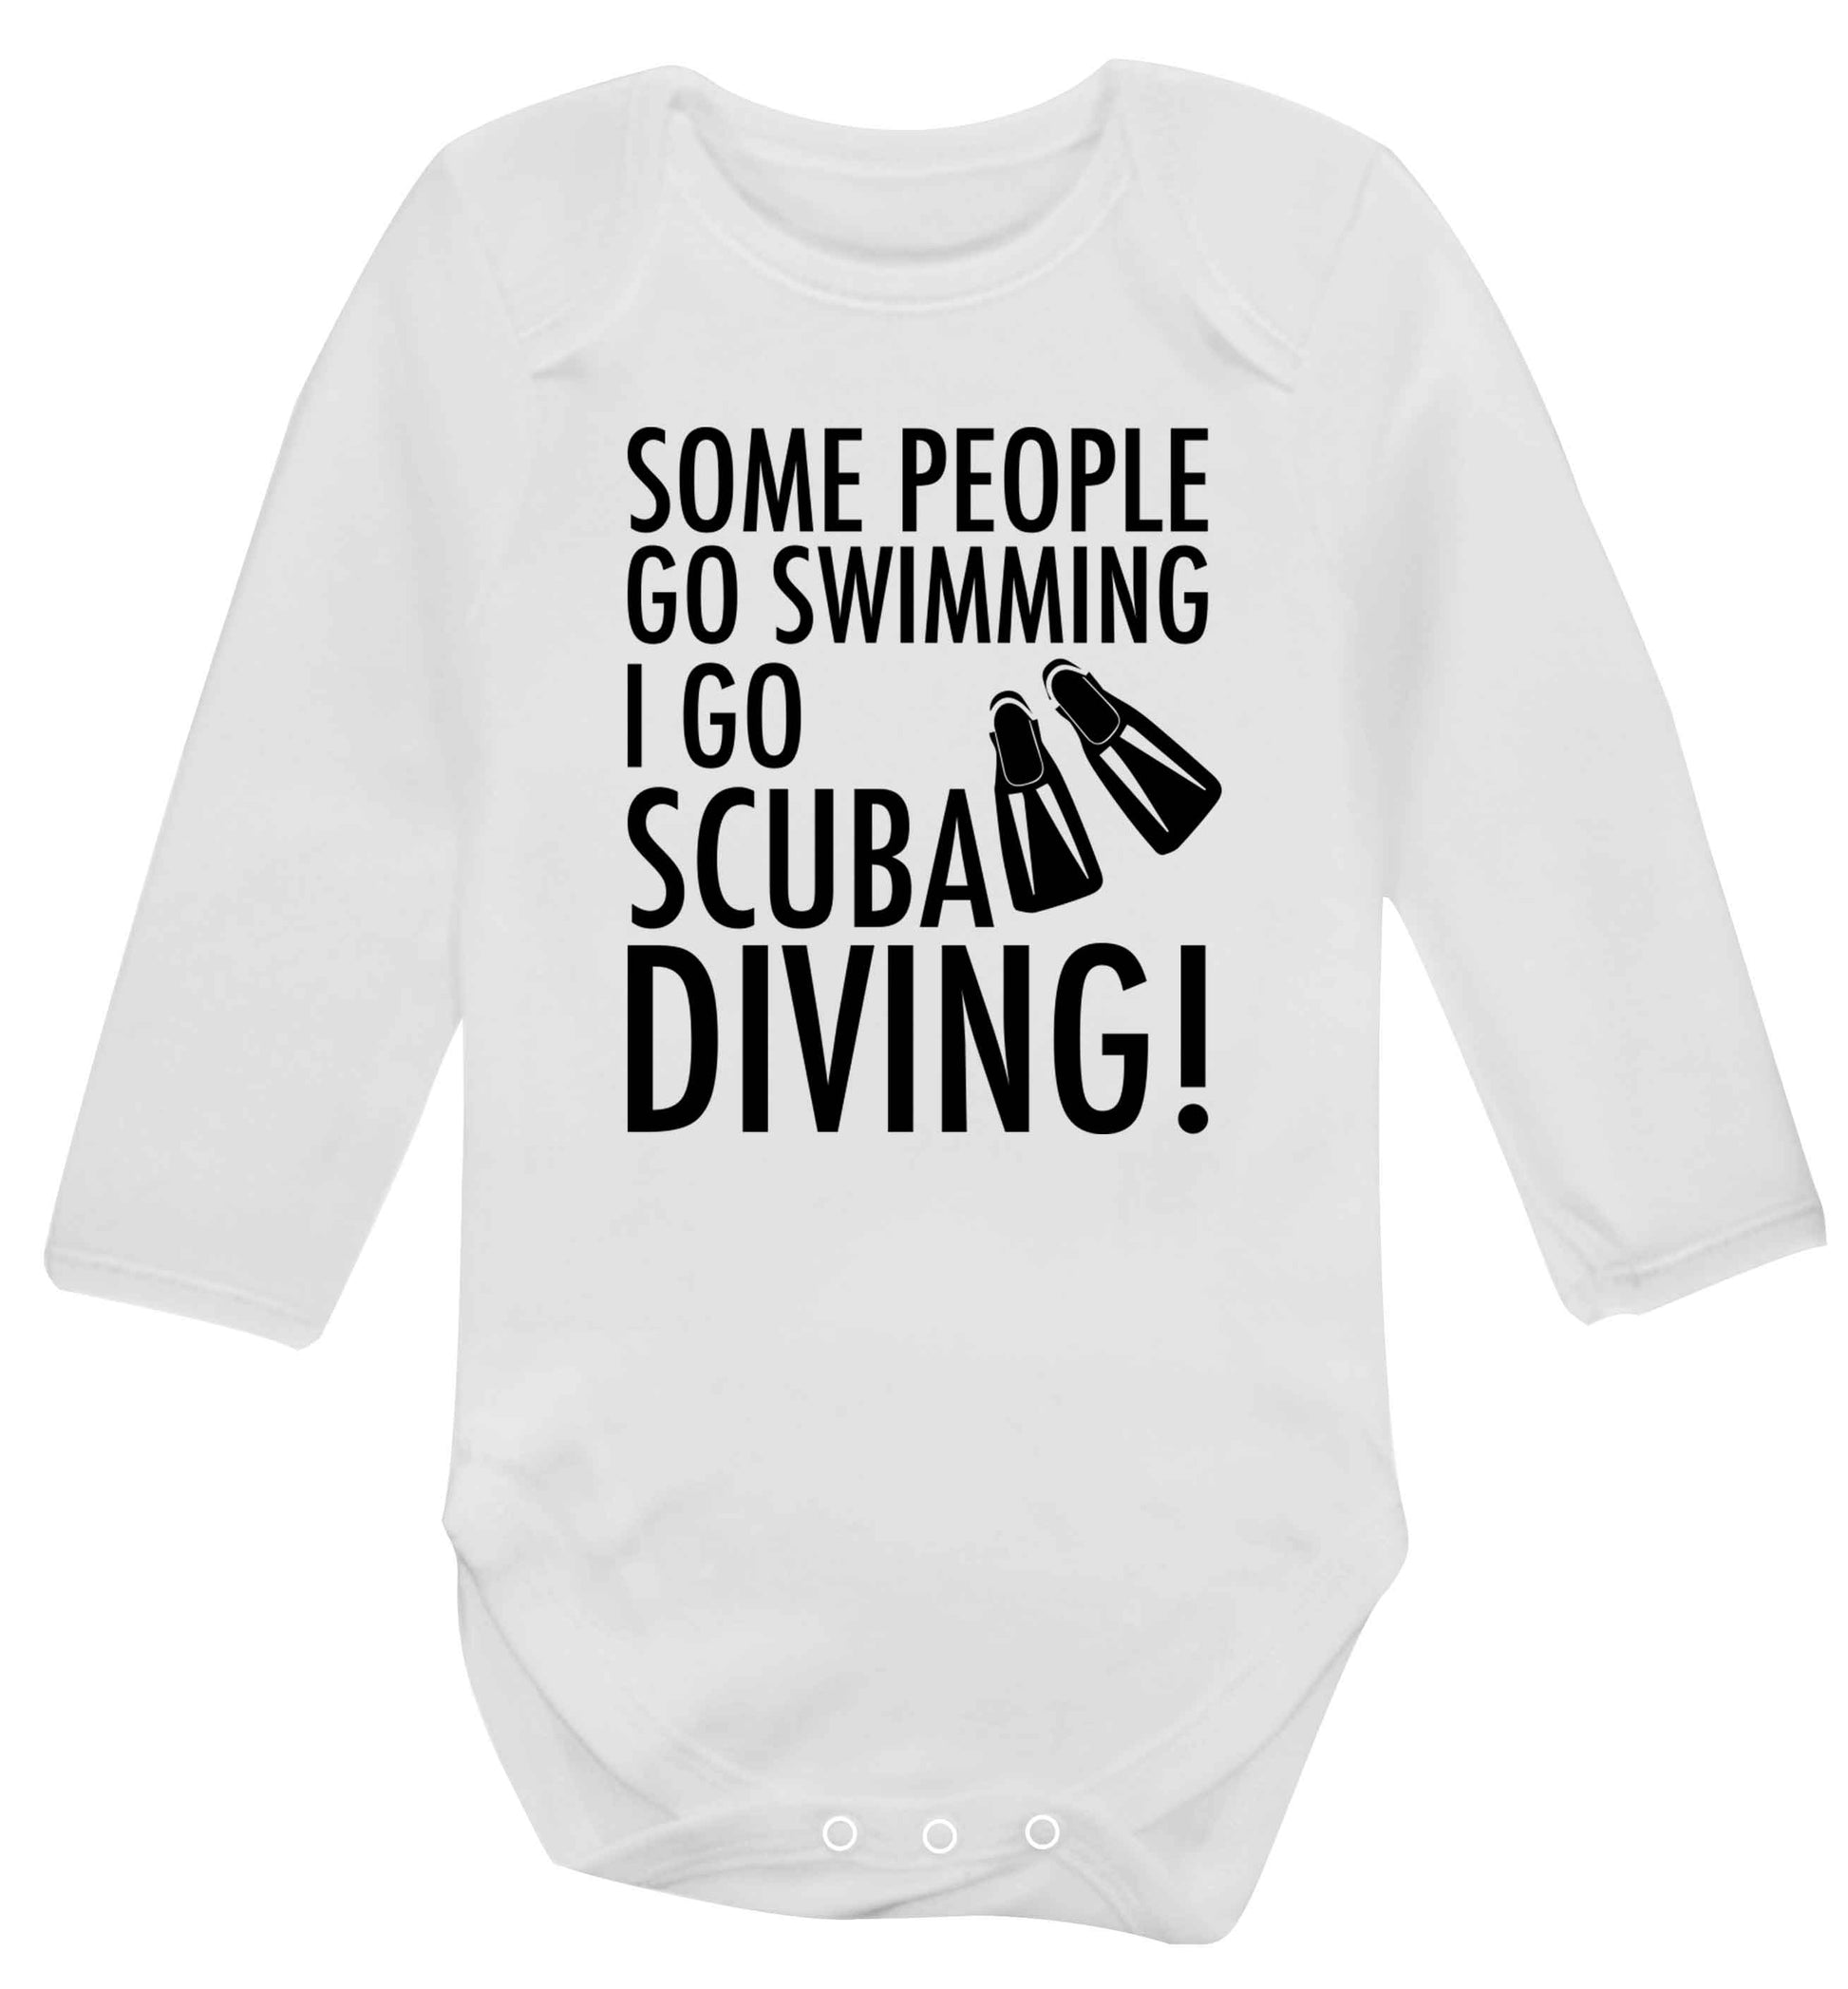 Some people go swimming I go scuba diving! Baby Vest long sleeved white 6-12 months